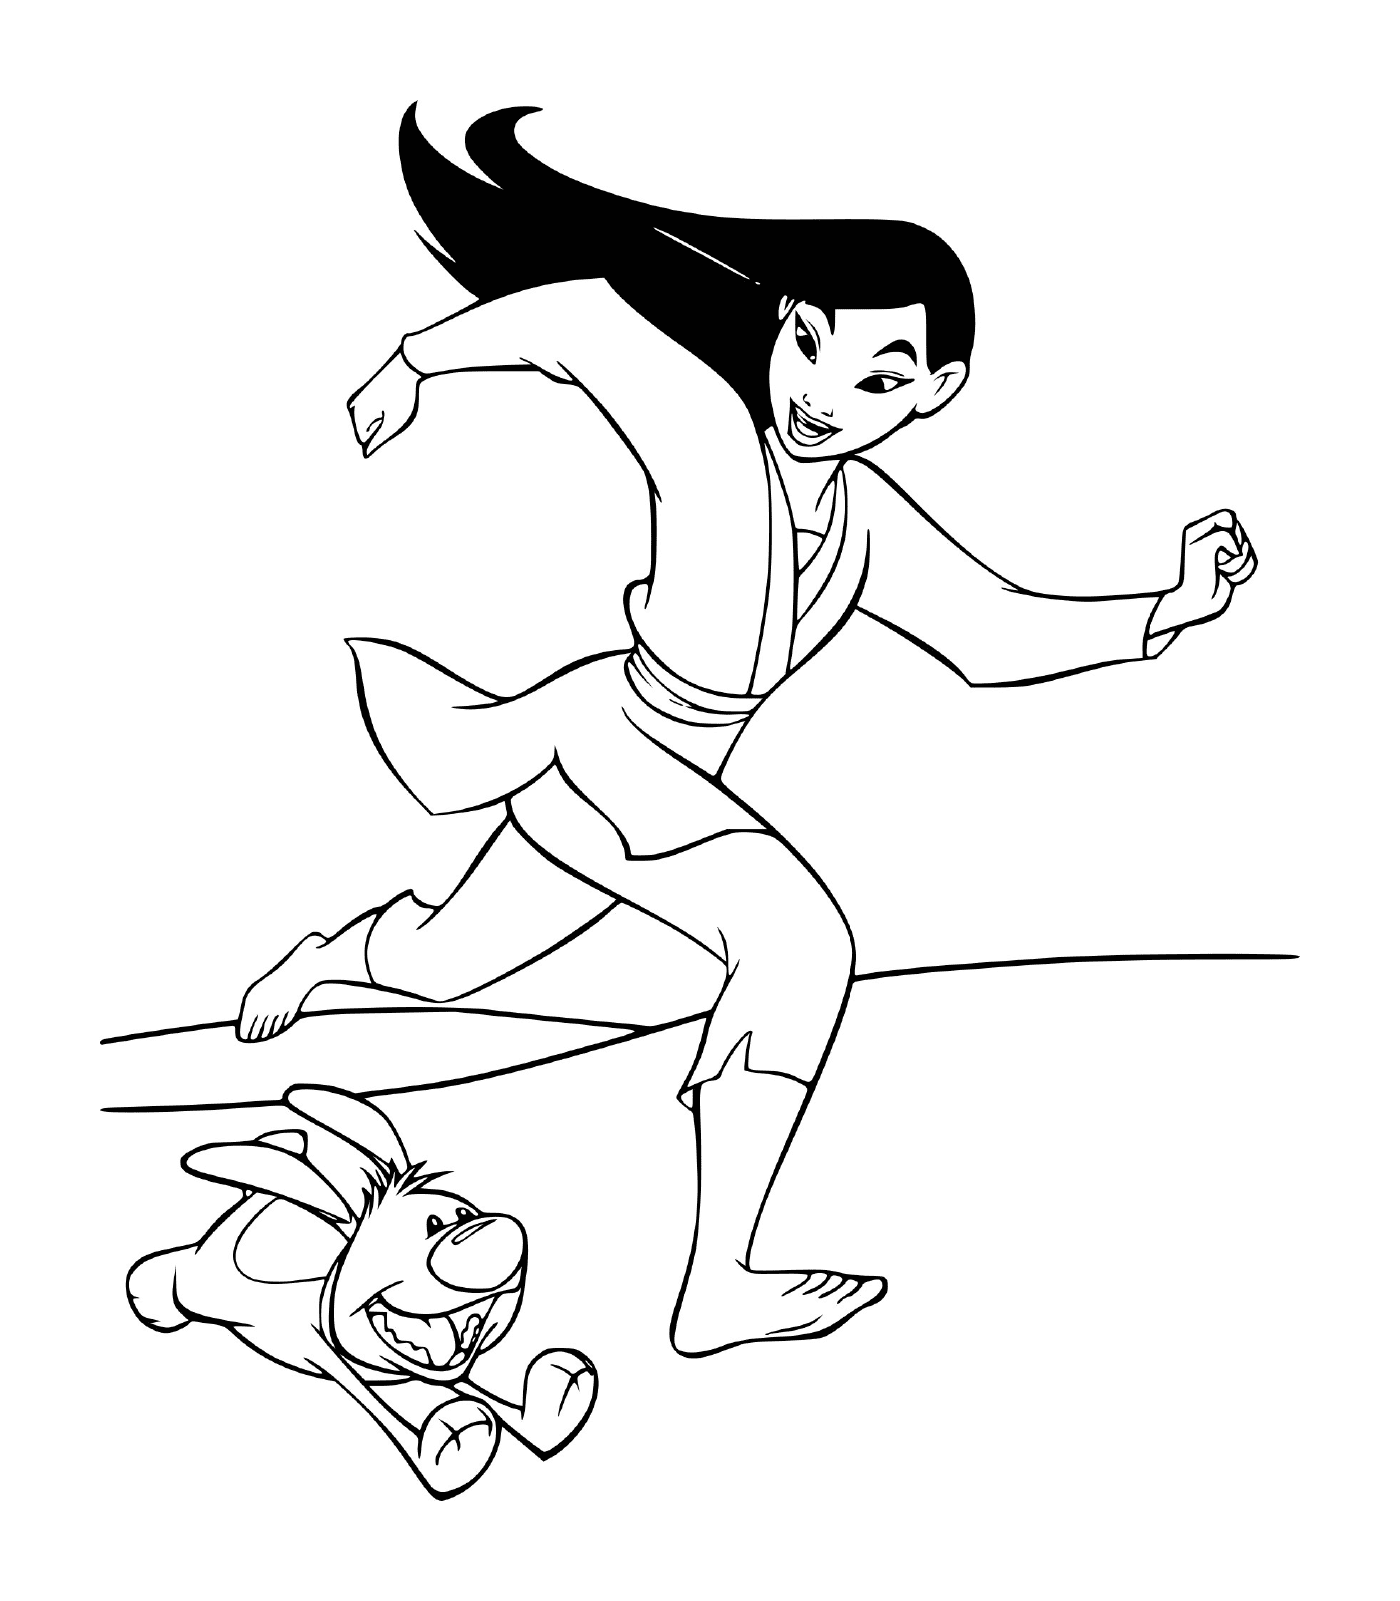  Mulan takes part in the race 